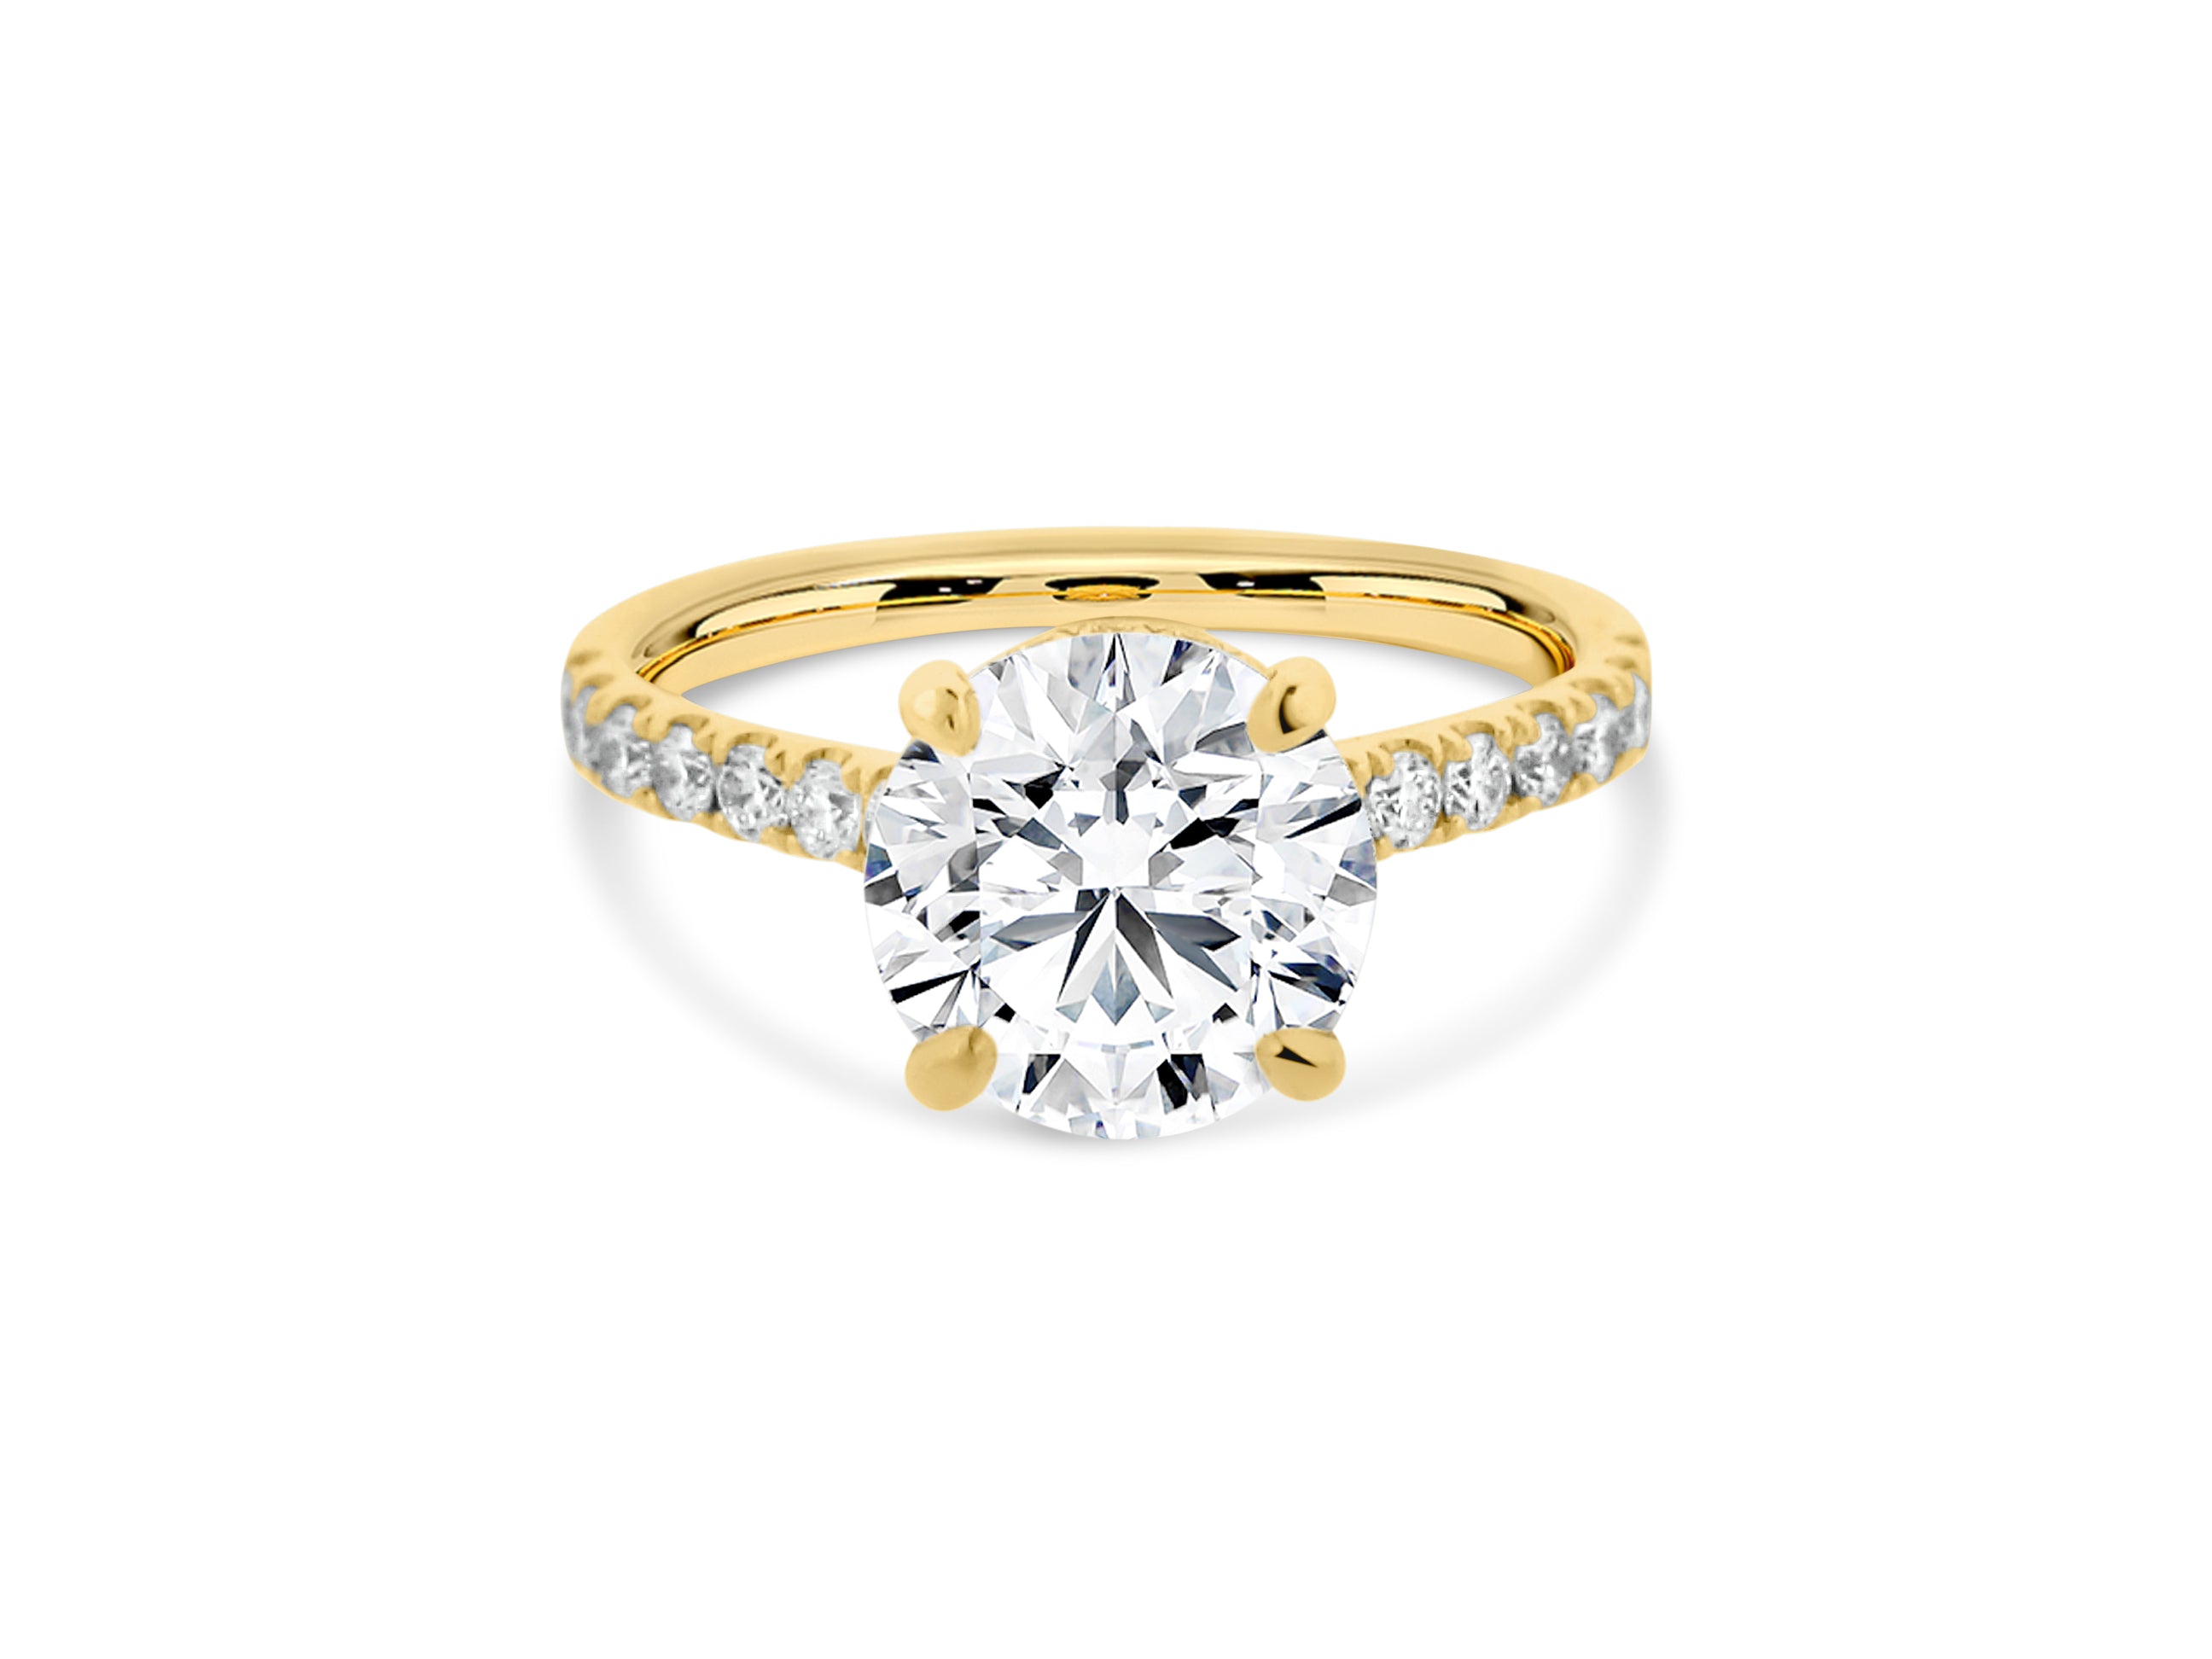 PRIVE' 18K YELLOW GOLD 2.53CT SI1 CLARITY AND F COLOR ROUND SWAROVSKI LAB GROWN DIAMOND SURROUNDED BY .52CT VS/SI-F NATURAL DIAMOND MOUNTING - CERTIFIED XXX